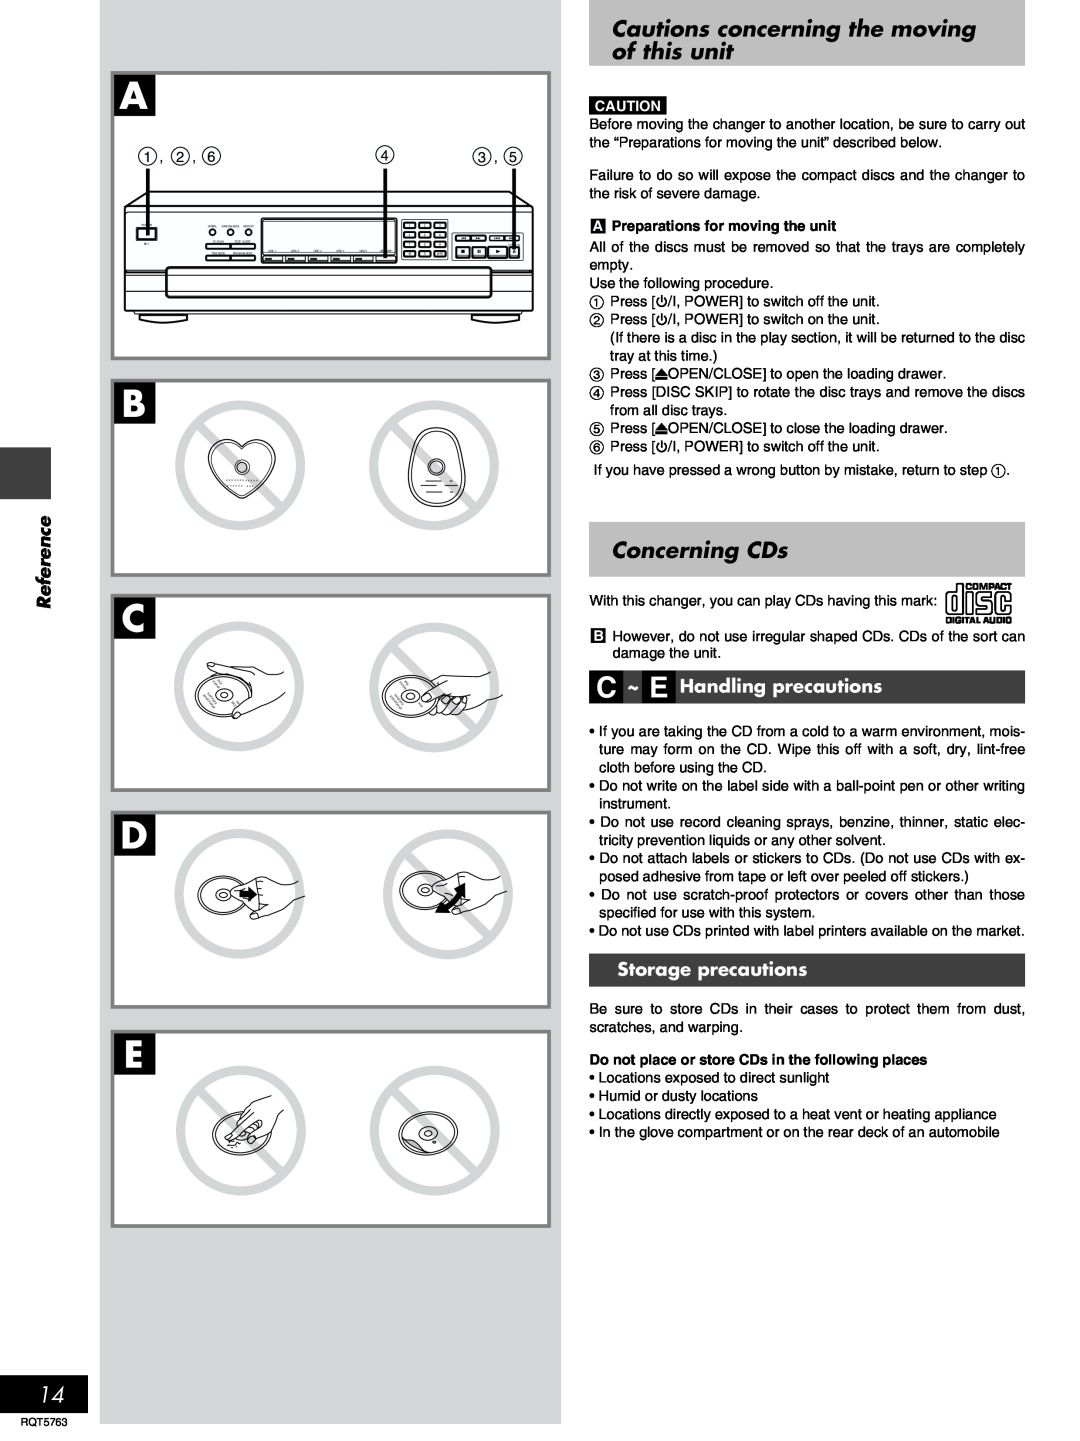 Panasonic SL-PD9 manual Cautions concerning the moving of this unit, Concerning CDs, Reference, C ~ E Handling precautions 